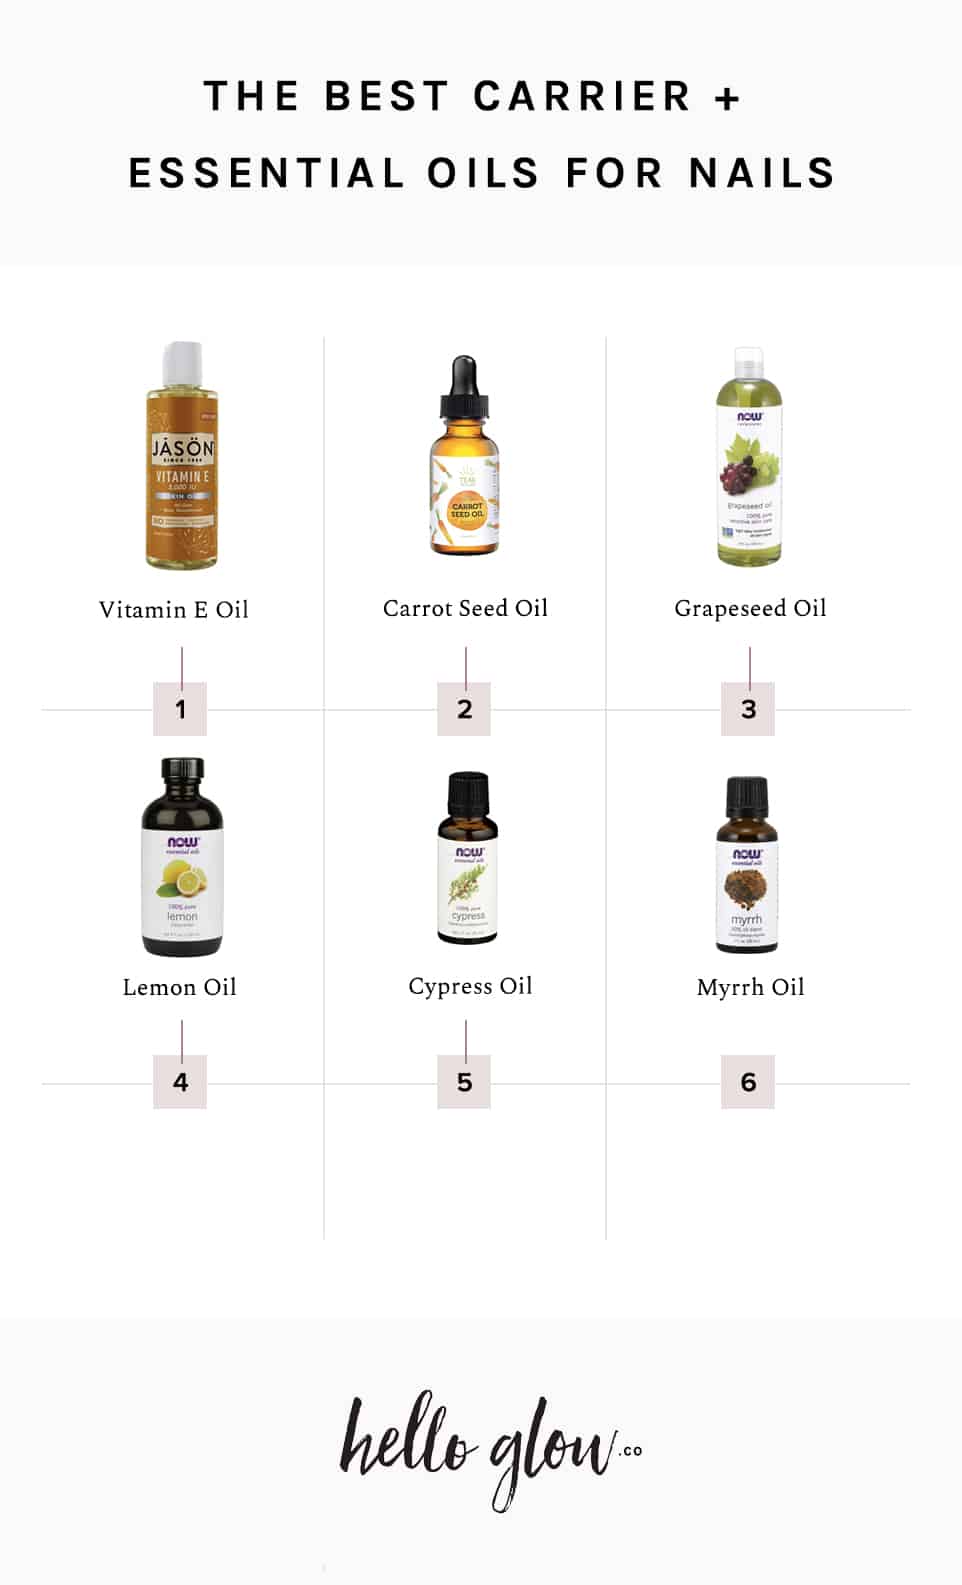 The Best Carrier + Essential Oils for Nails - HelloGlow.co